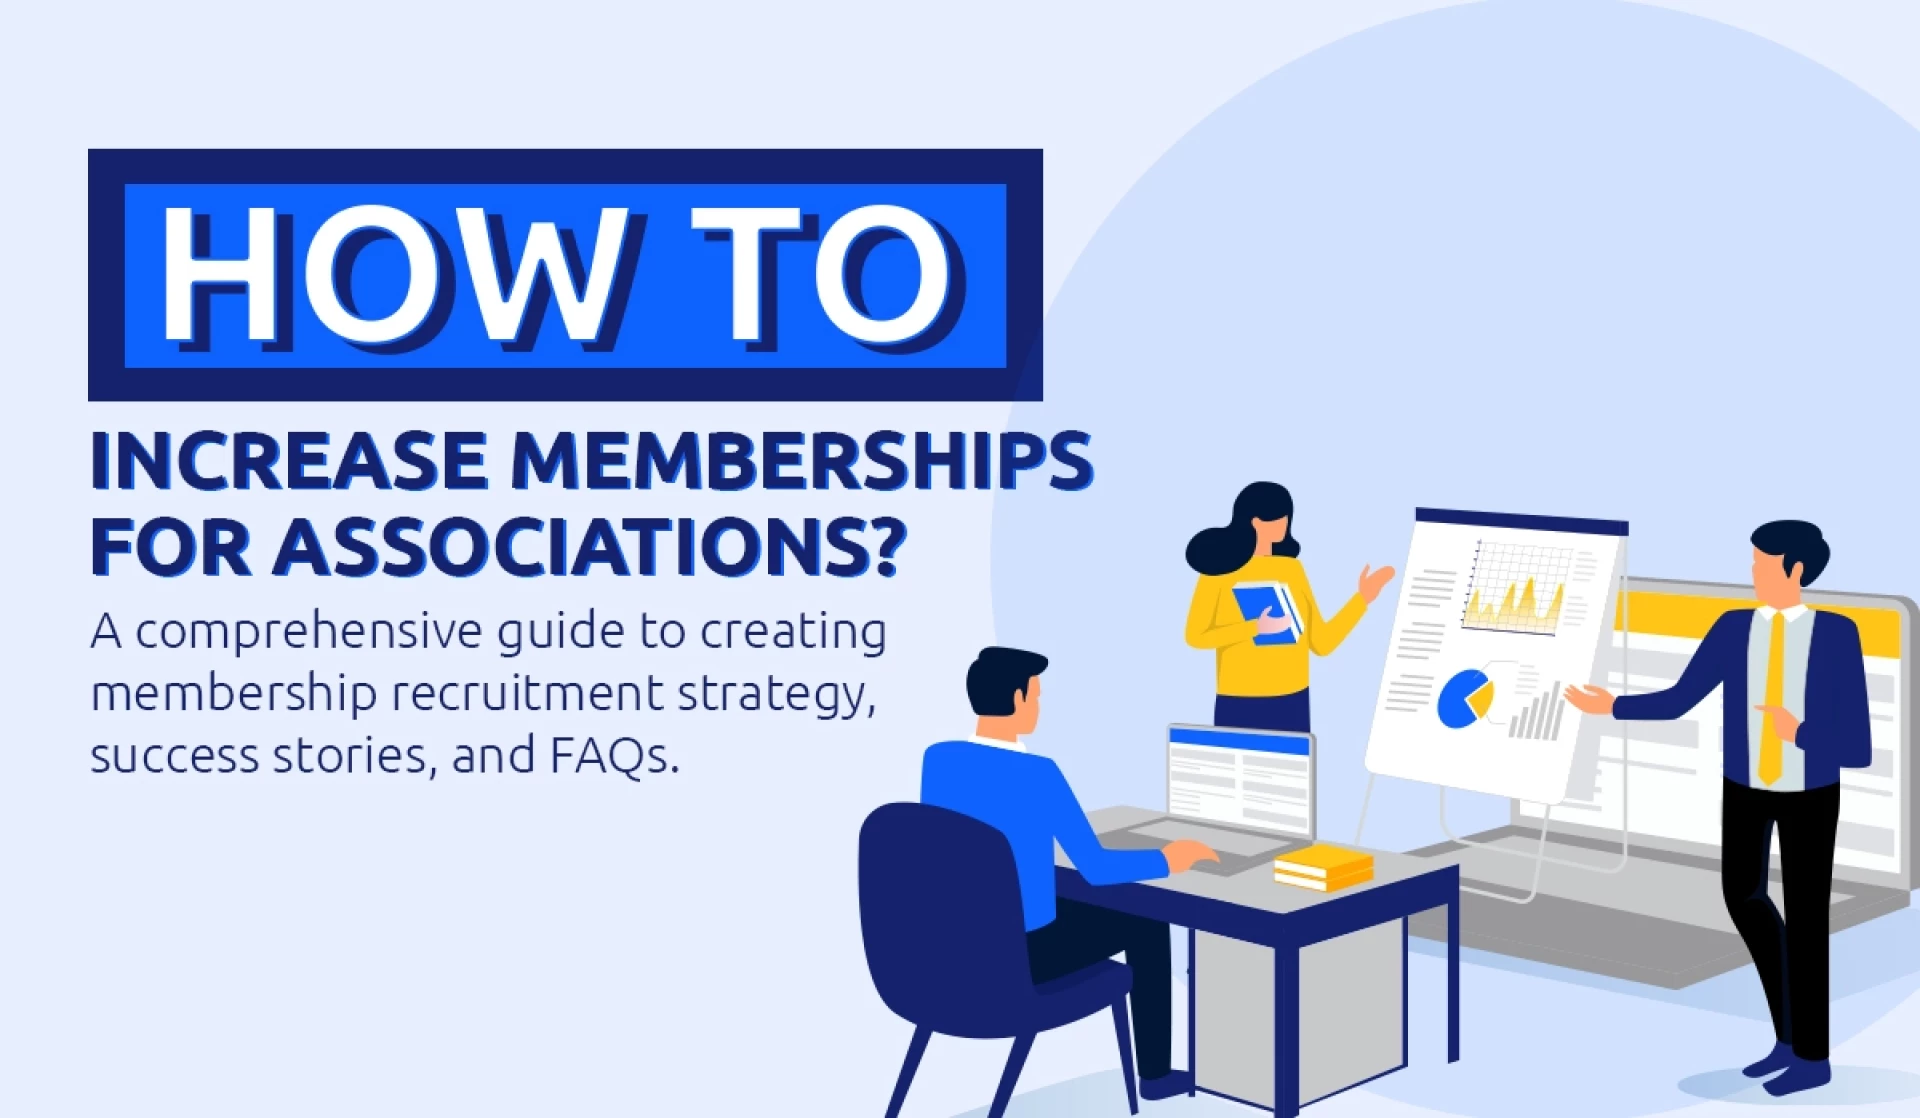 How to Increase Membership for Associations? [A Comprehensive Guide to Creating Membership Recruitment Strategy, Success Stories, and FAQs]